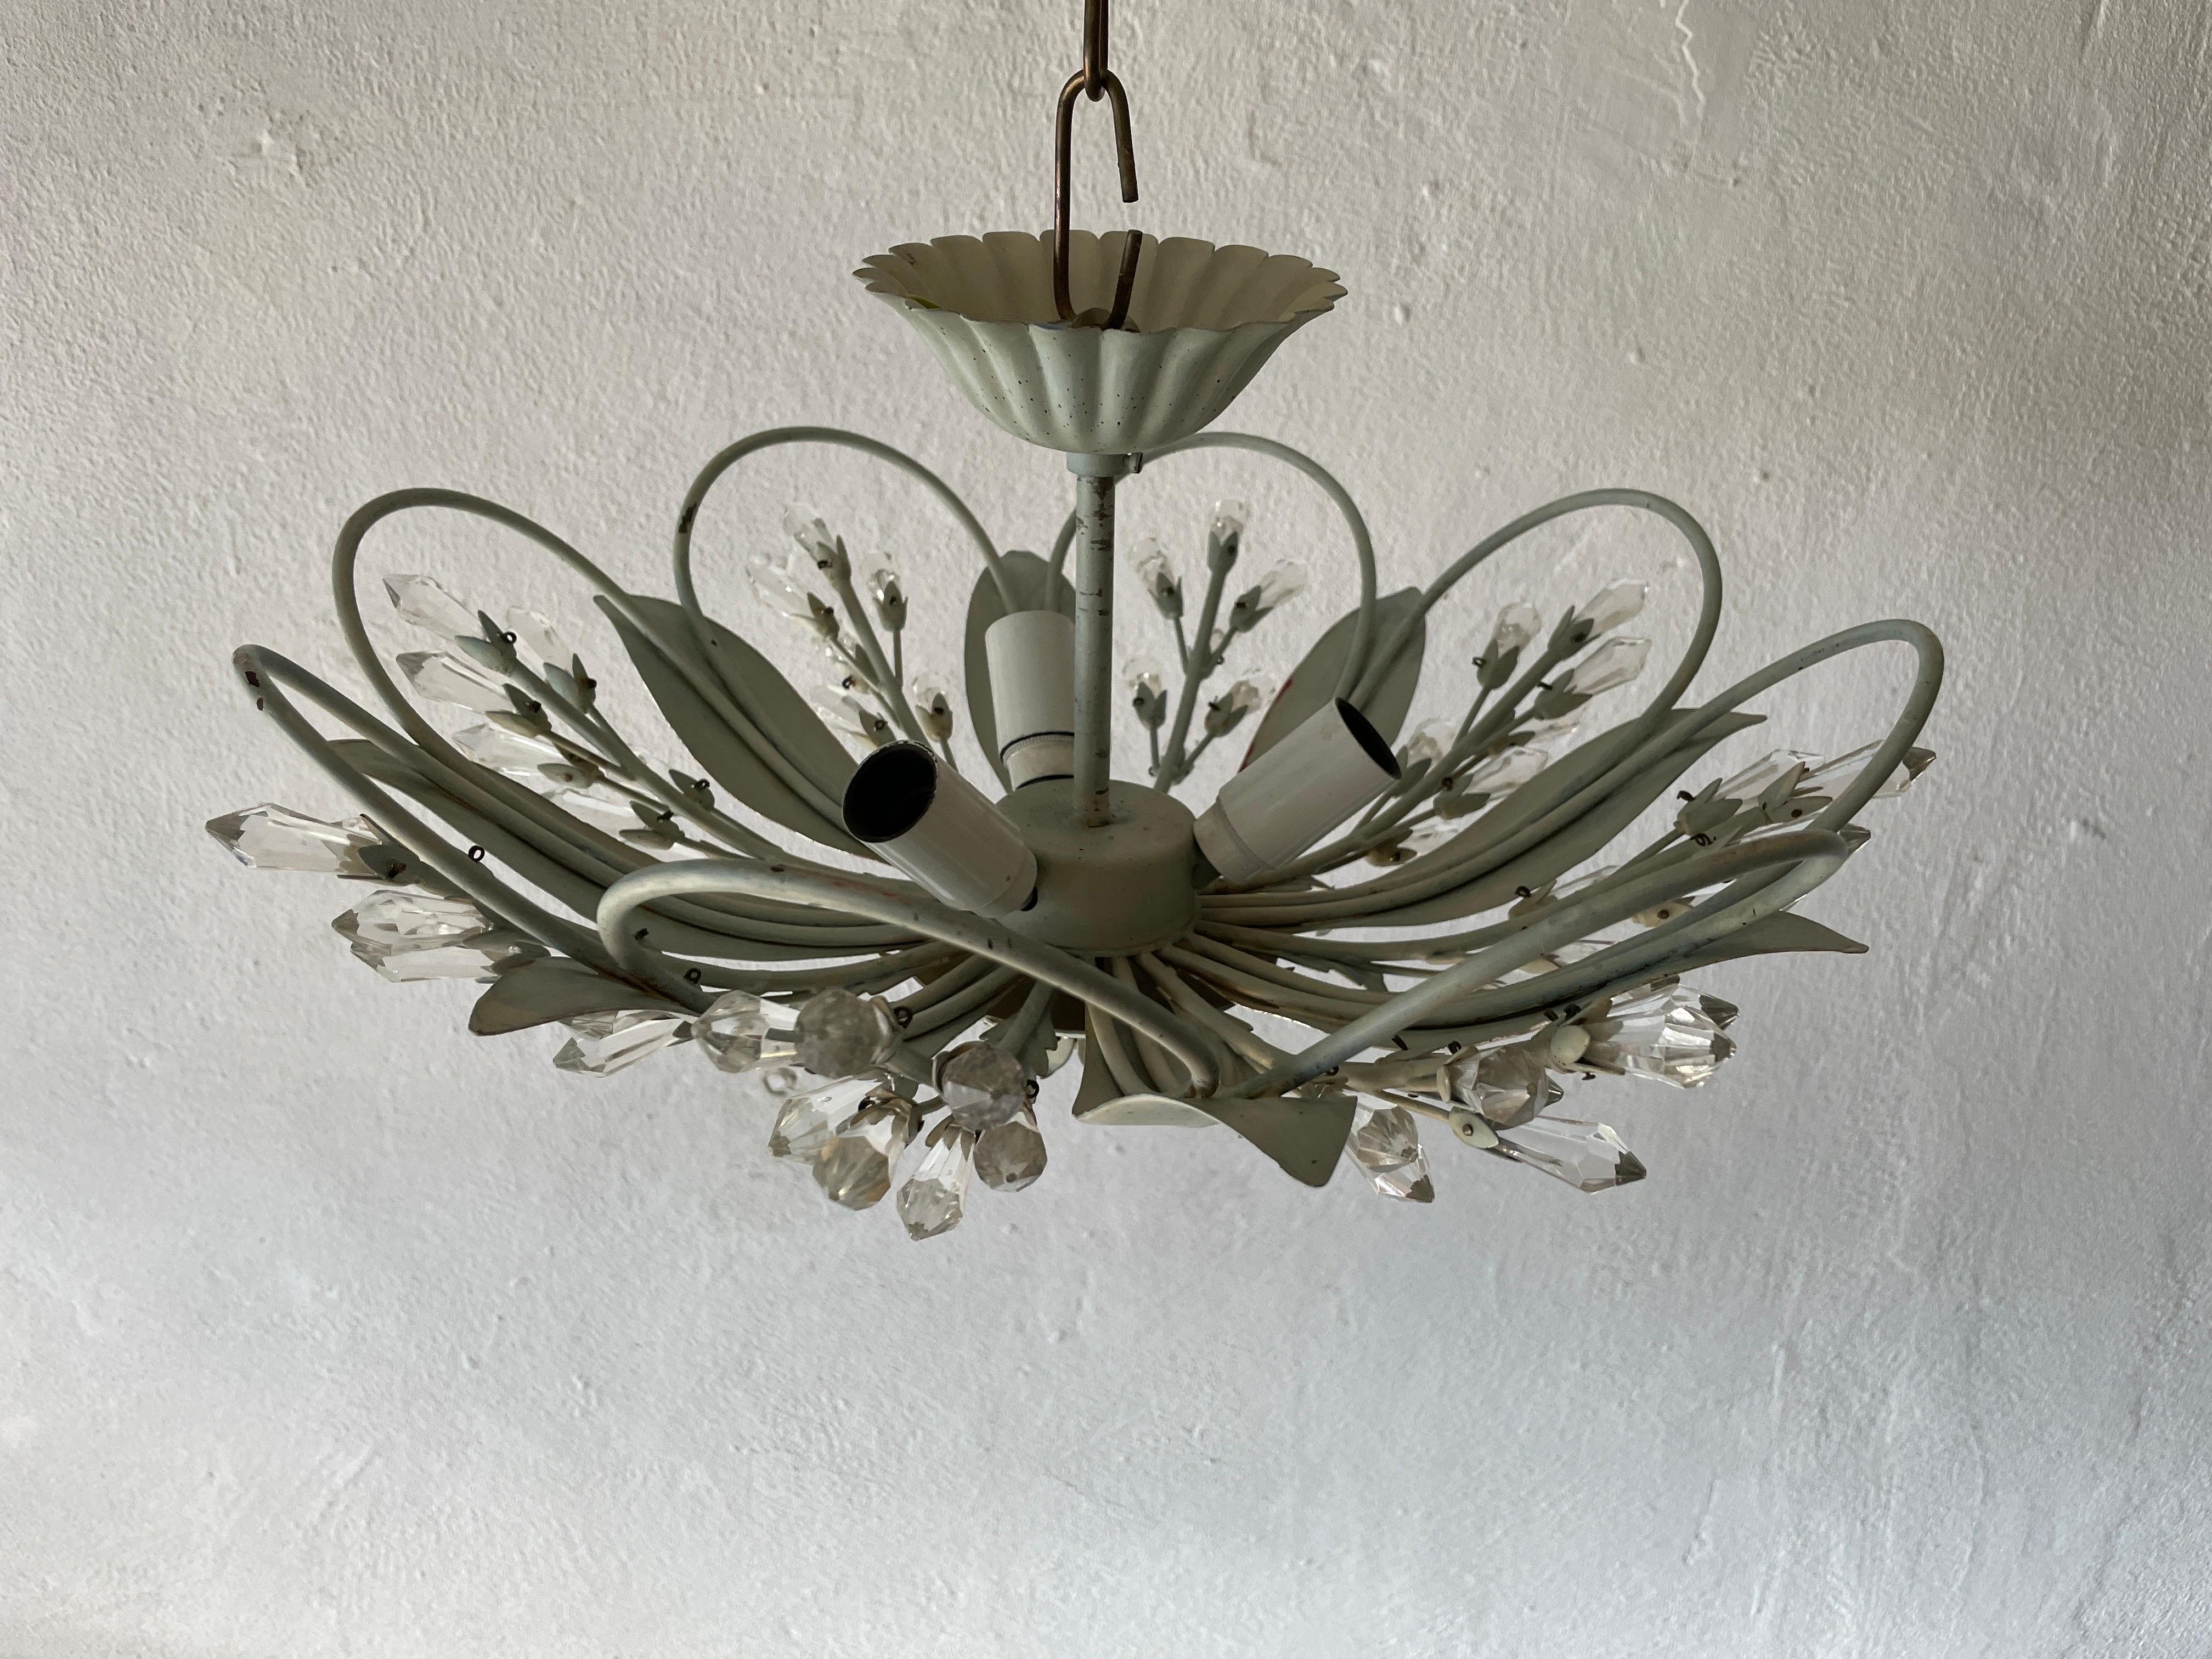 Mid-20th Century Flower Design Ceiling Lamp with Glass Ornaments, 1950s, Germany For Sale